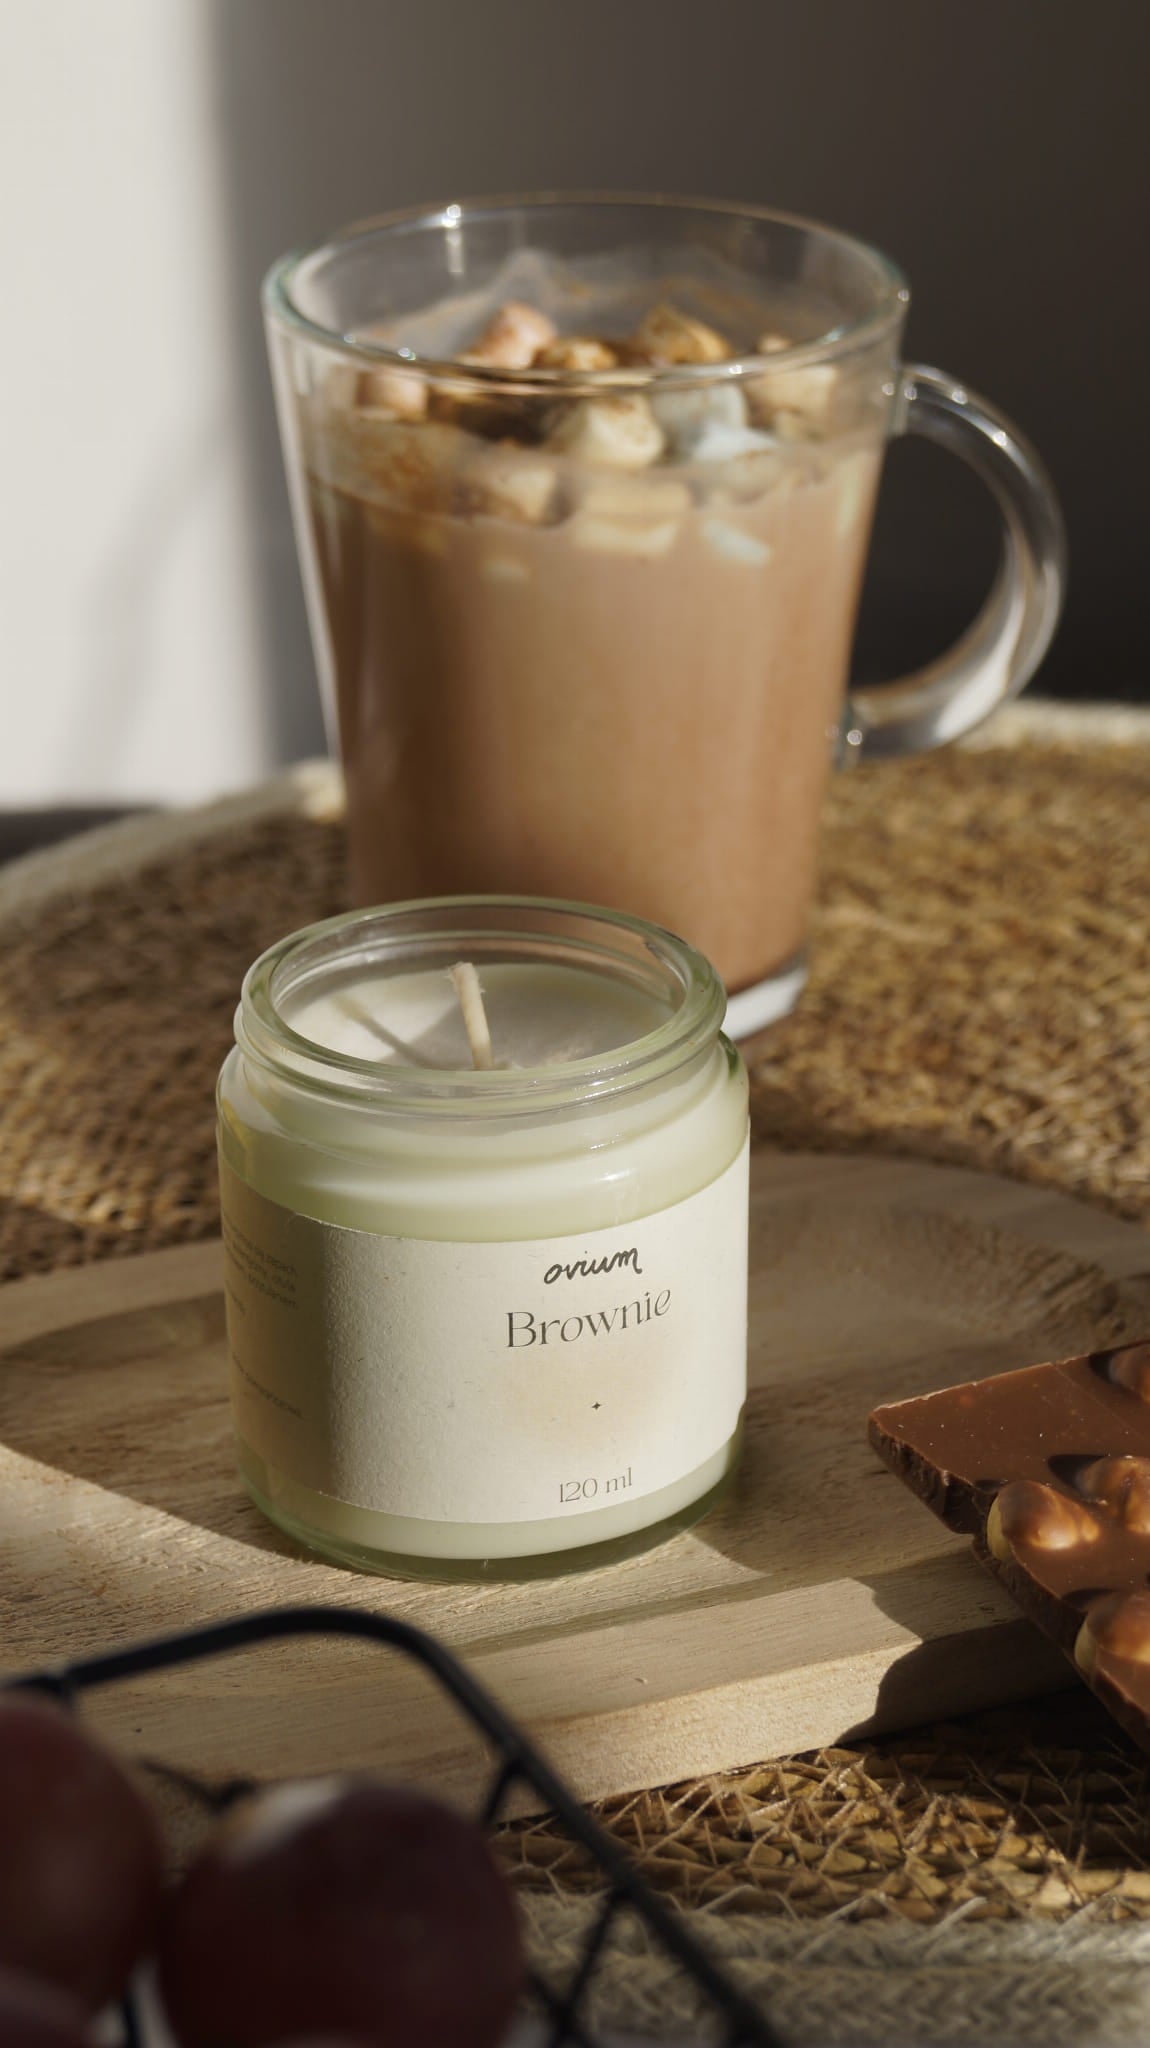 Ovium  Brownie - Soy Candle | 120ml